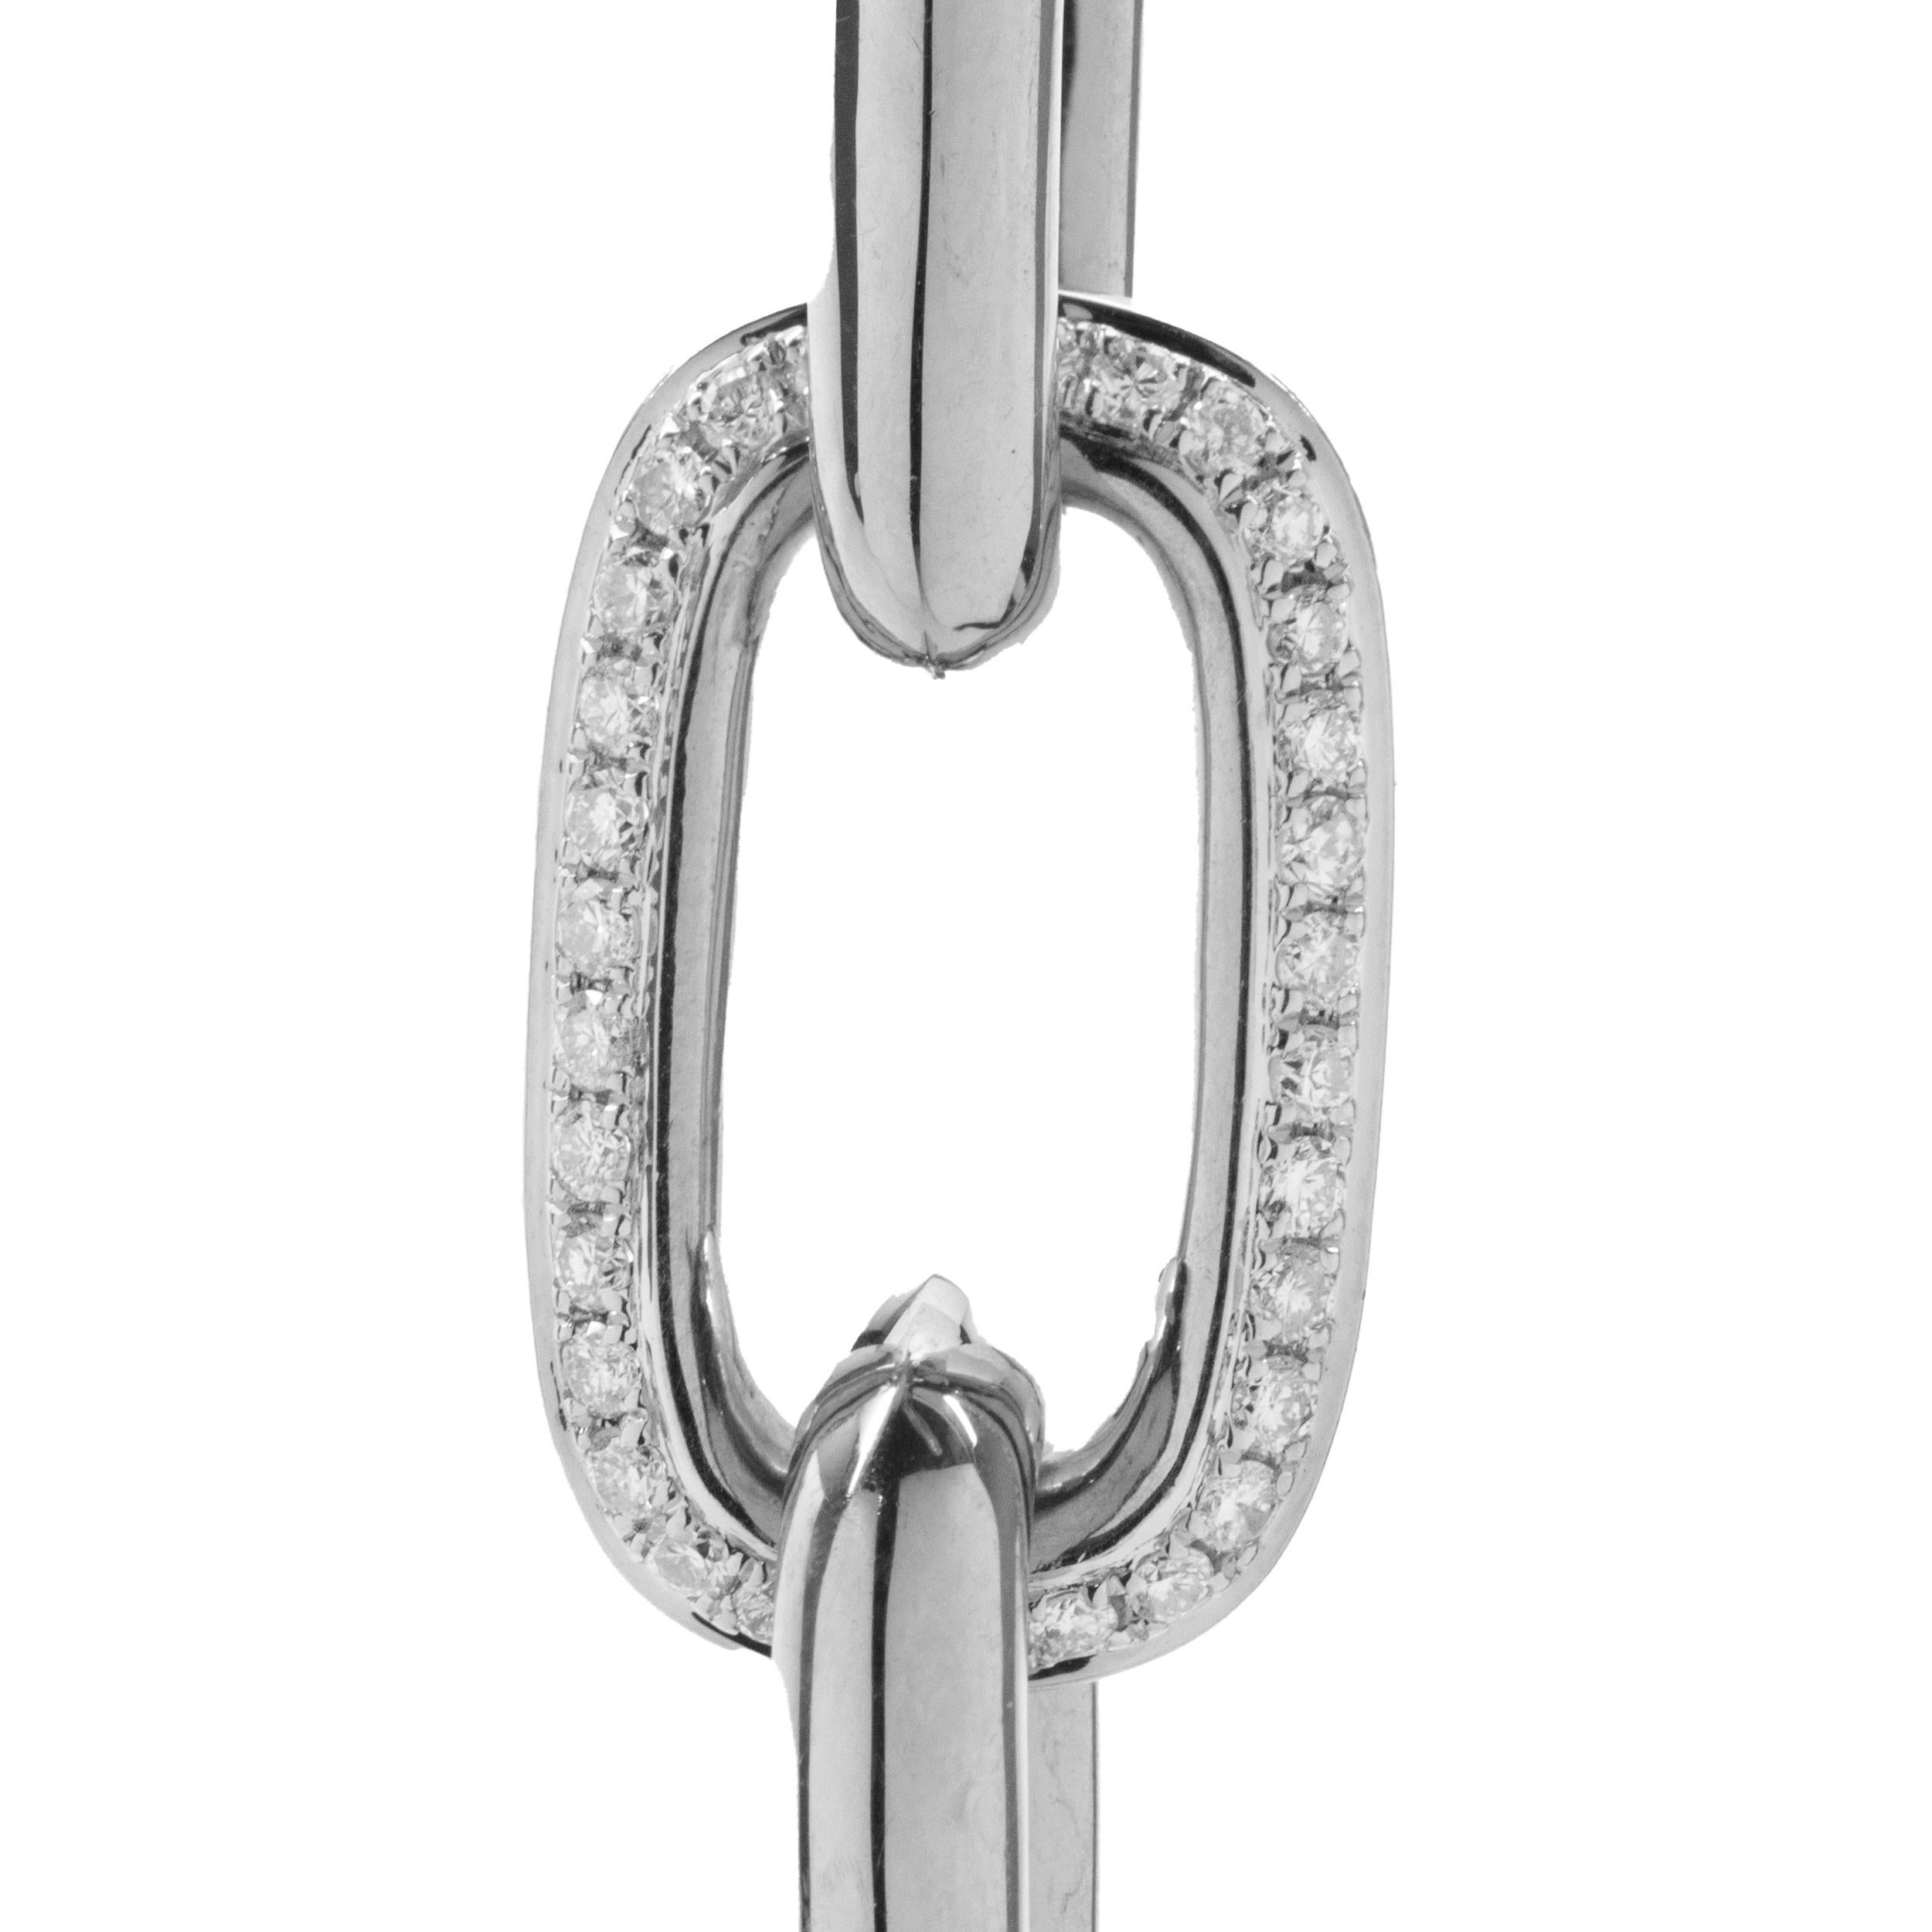 Designer: custom 
Material: 18K white gold
Diamond: 384 round brilliant cut = 6.30cttw
Color:  G
Clarity: VS2
Dimensions: bracelet will fit up to a 7.5-inch wrist
Weight: 26.39 grams
